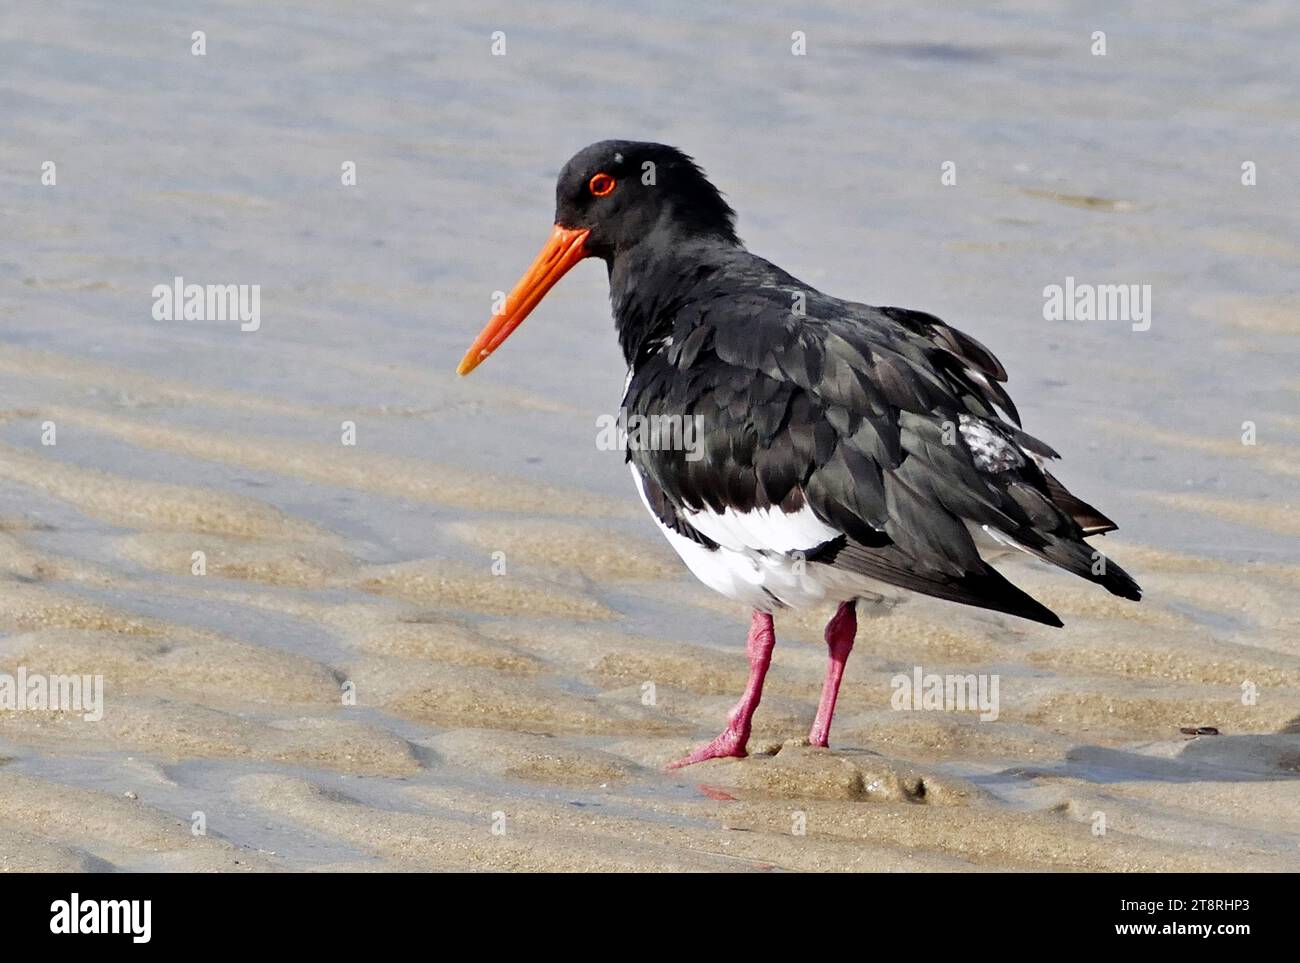 Variable oystercatcher (Haematopus unicolor), The variable oystercatcher is a large heavily-built shorebird. Adults have black upperparts, their underparts vary from all black, through a range of smudgy intermediate states to white. They have a conspicuous long bright orange bill (longer in females), and stout coral-pink legs. The iris is red and eye-ring orange. Downy chicks occur in two colour morphs; they have a black bill, pale-mid grey upper parts with black markings, and either grey or off-white underparts. Stock Photo